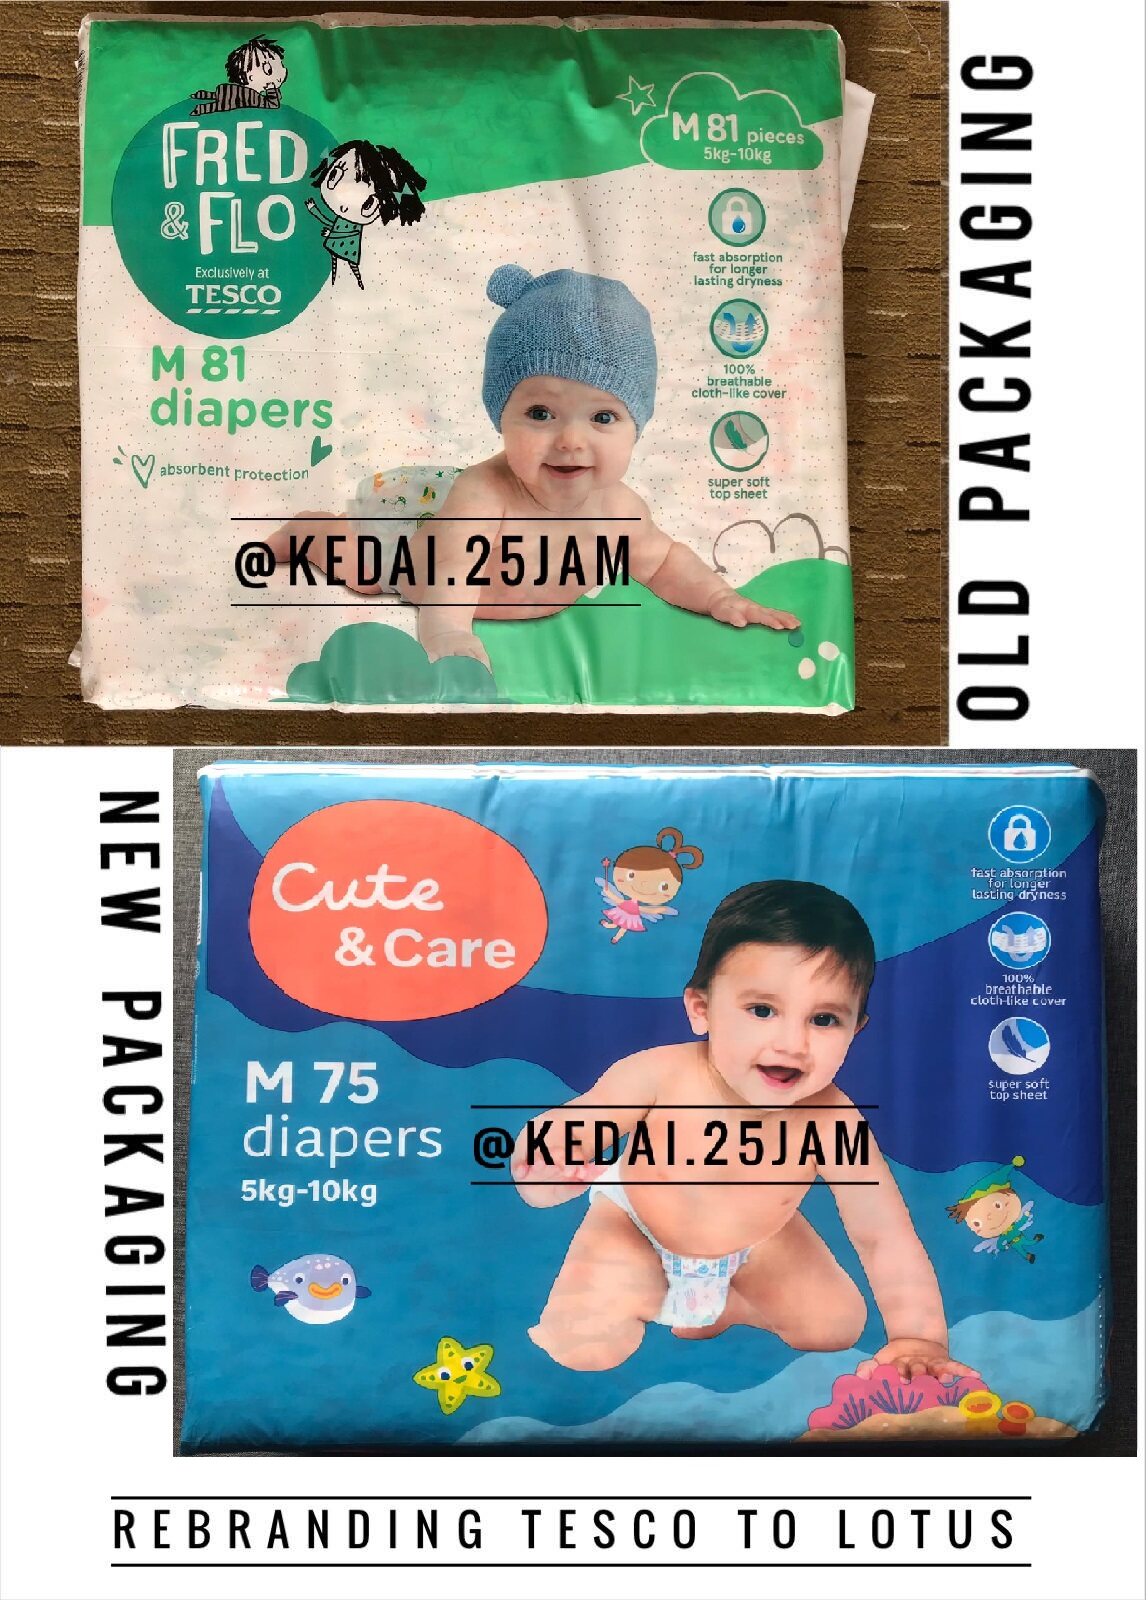 pampers do drukarki brother dcp-2315w